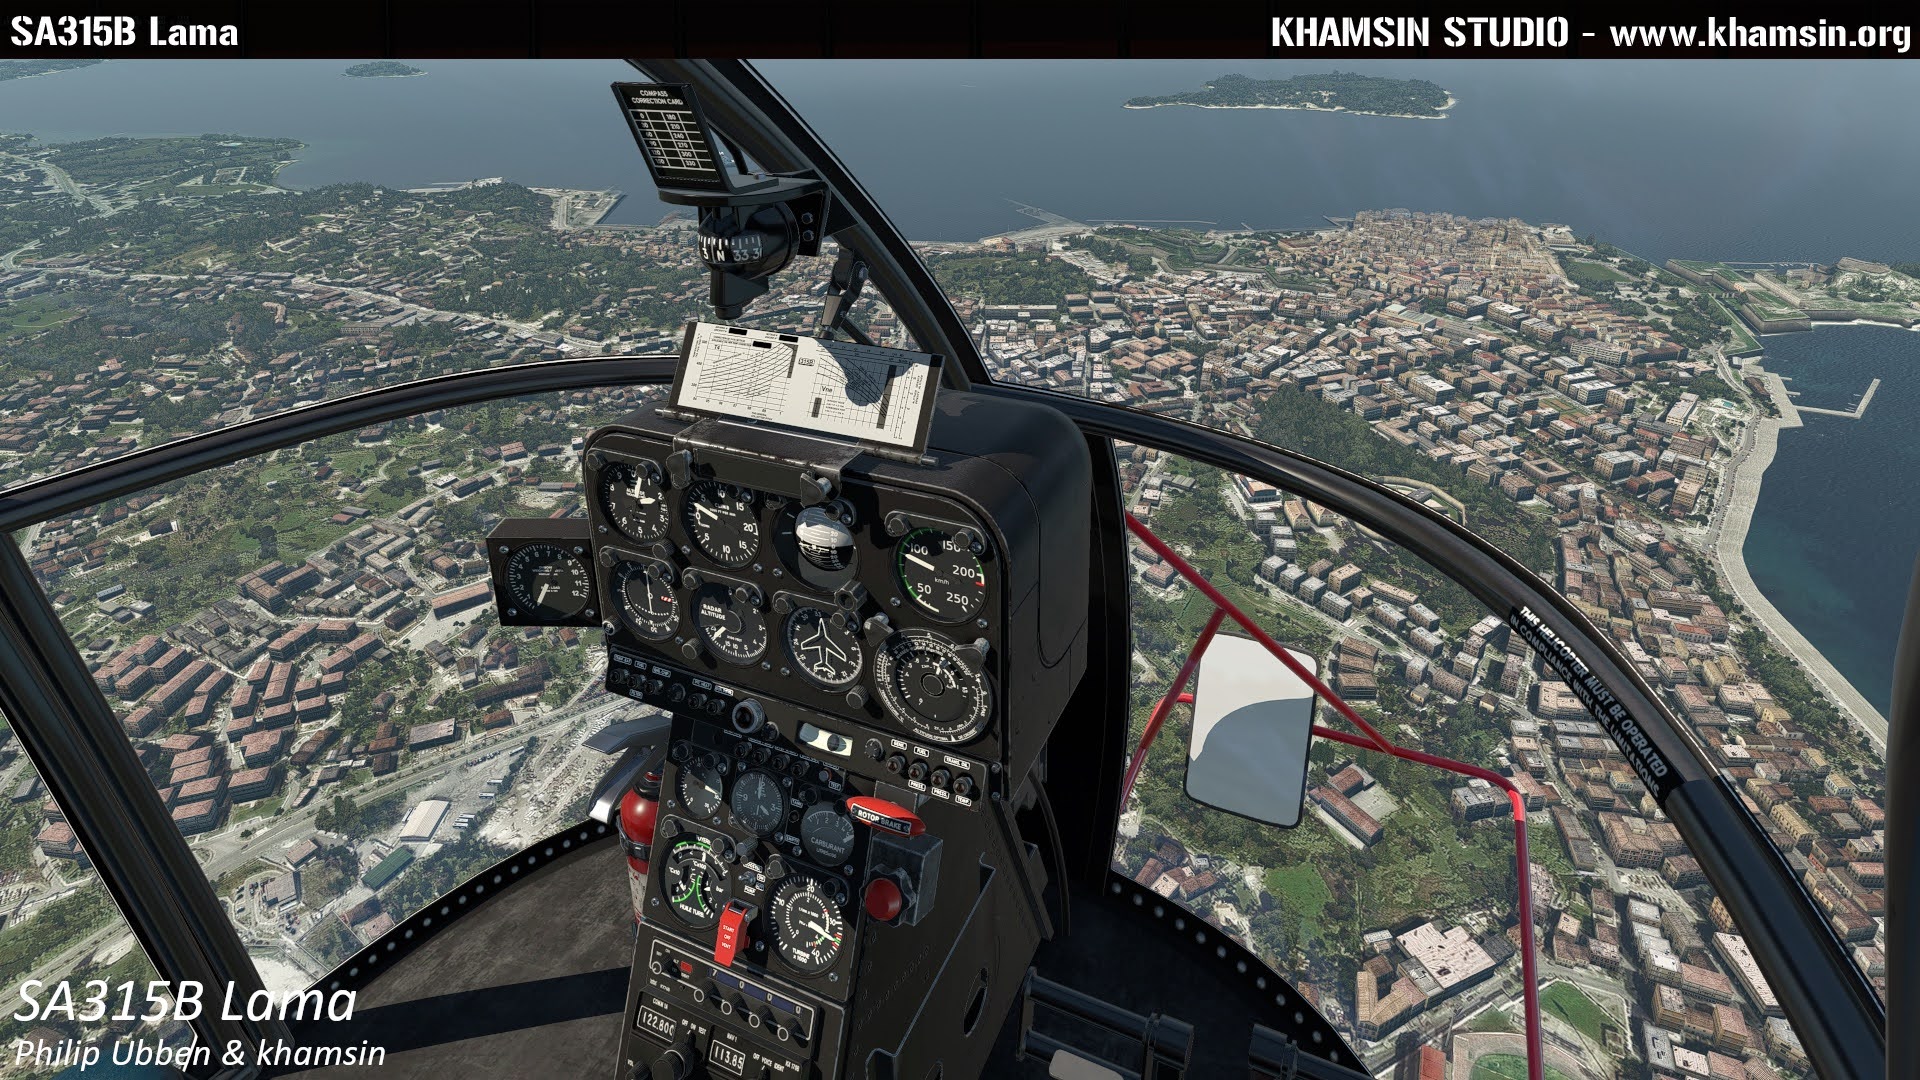 Philip Ubbem Releases SA 315B Lama Helicopter for X-Plane - Philip Ubben, X-Plane